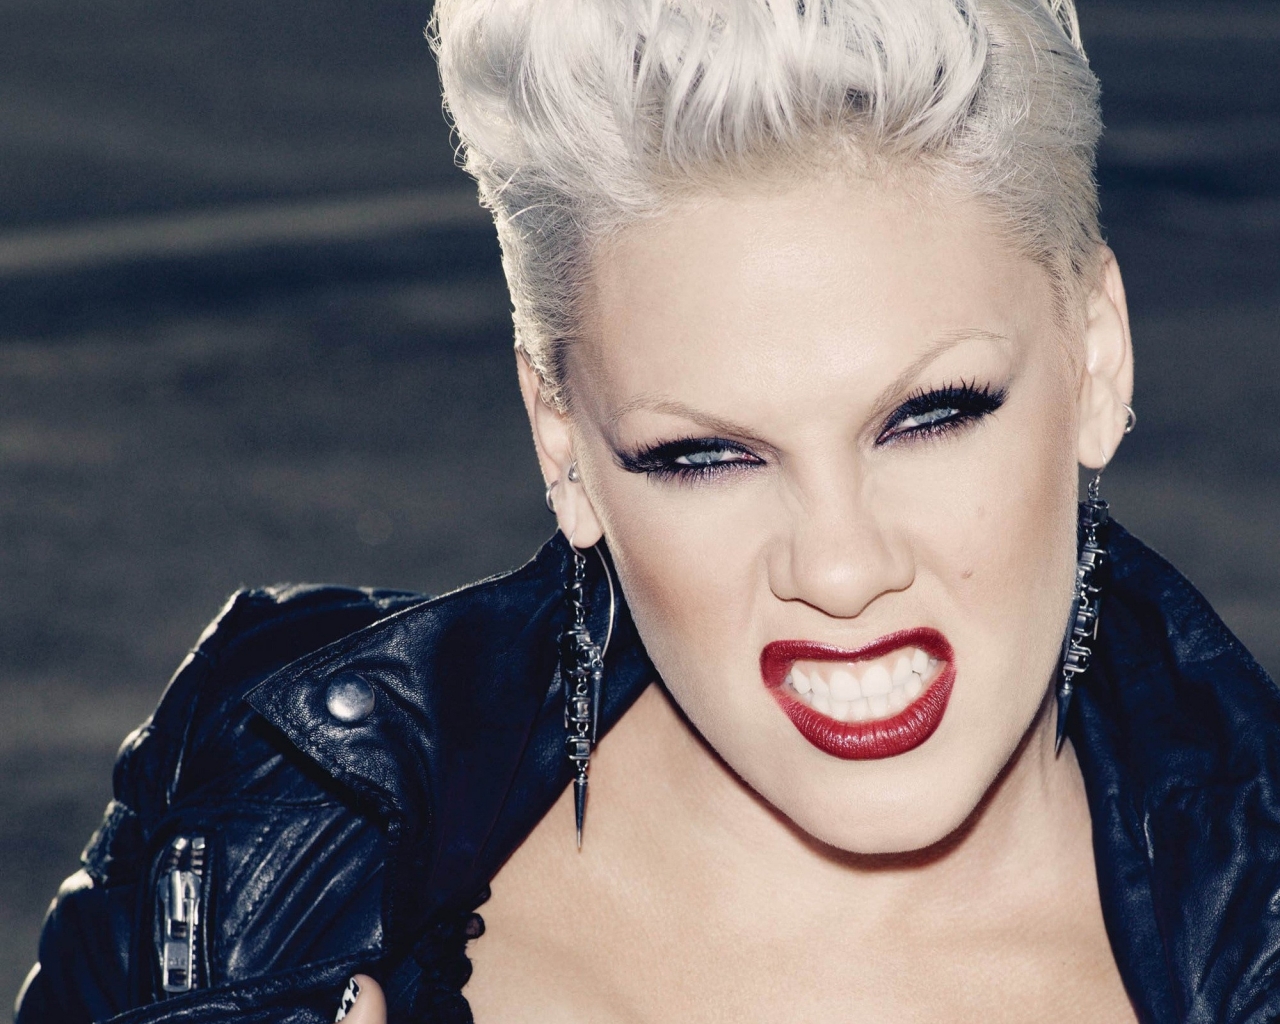 Inspirational Quotes By Singer Pink 